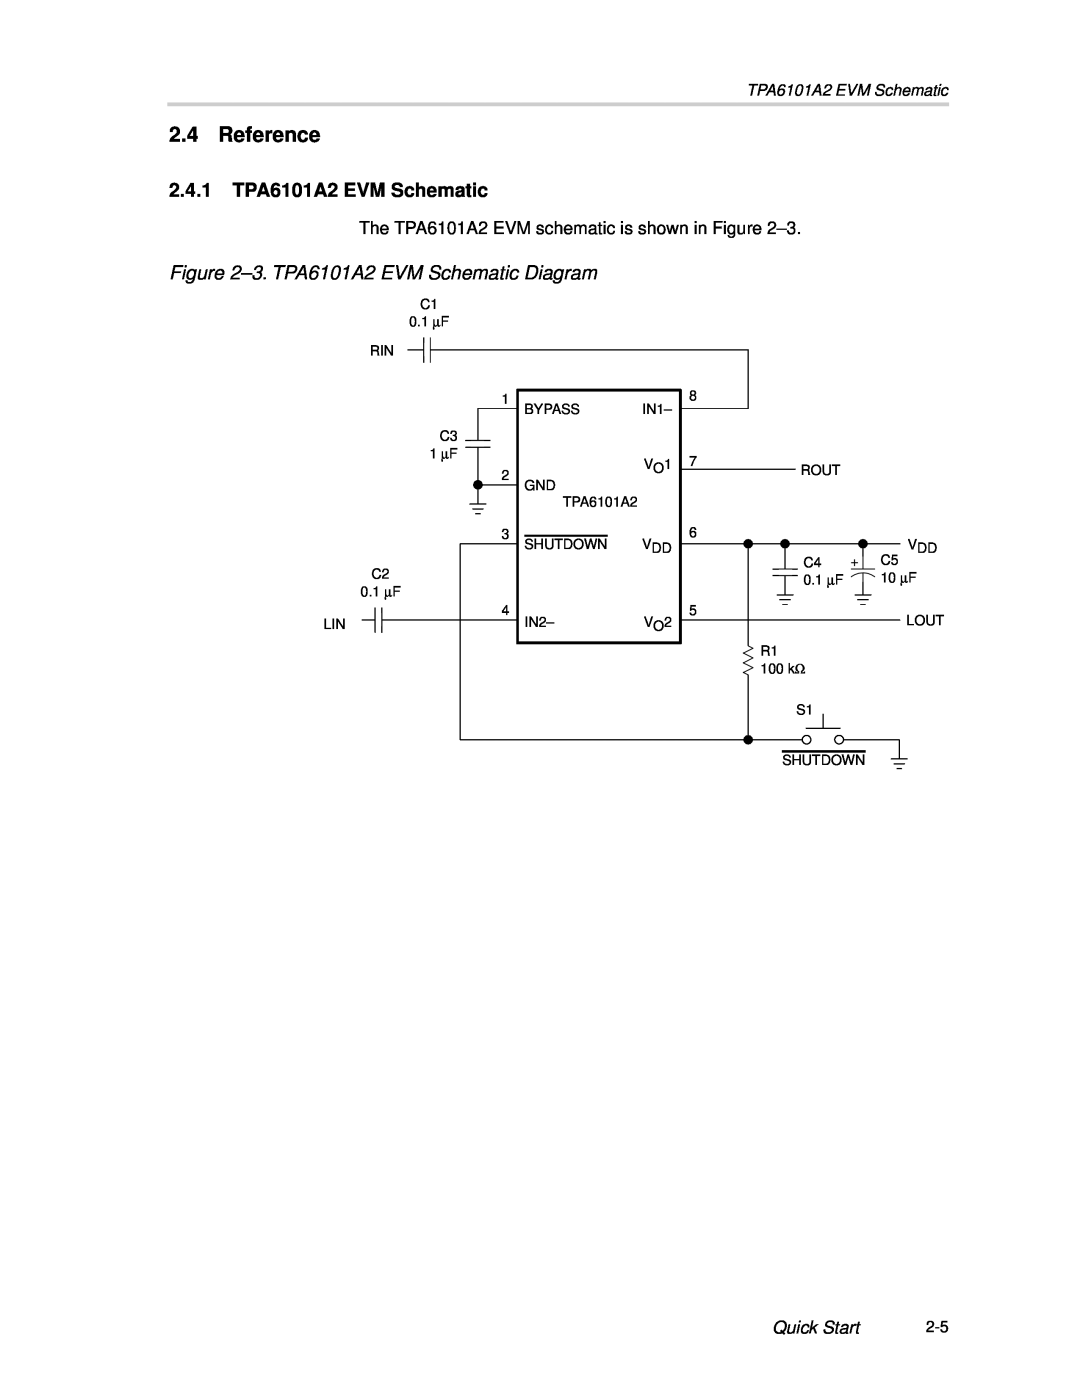 Texas Instruments manual Reference, 2.4.1TPA6101A2 EVM Schematic, 3.TPA6101A2 EVM Schematic Diagram, Quick Start 